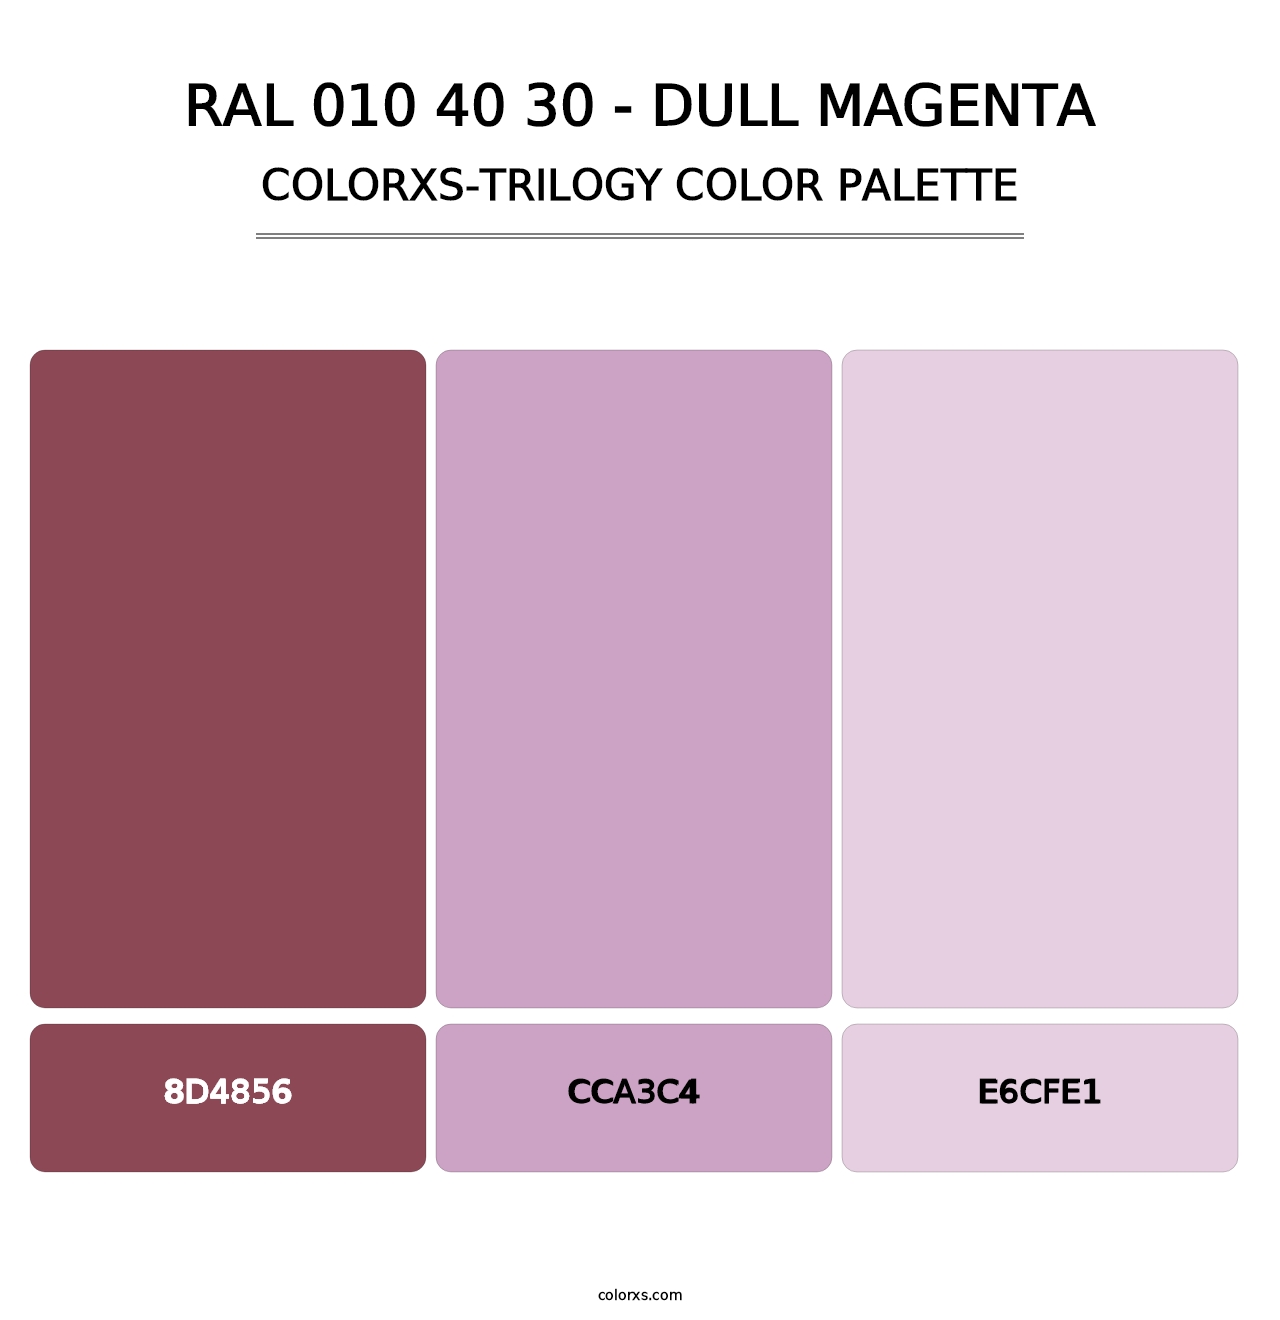 RAL 010 40 30 - Dull Magenta - Colorxs Trilogy Palette